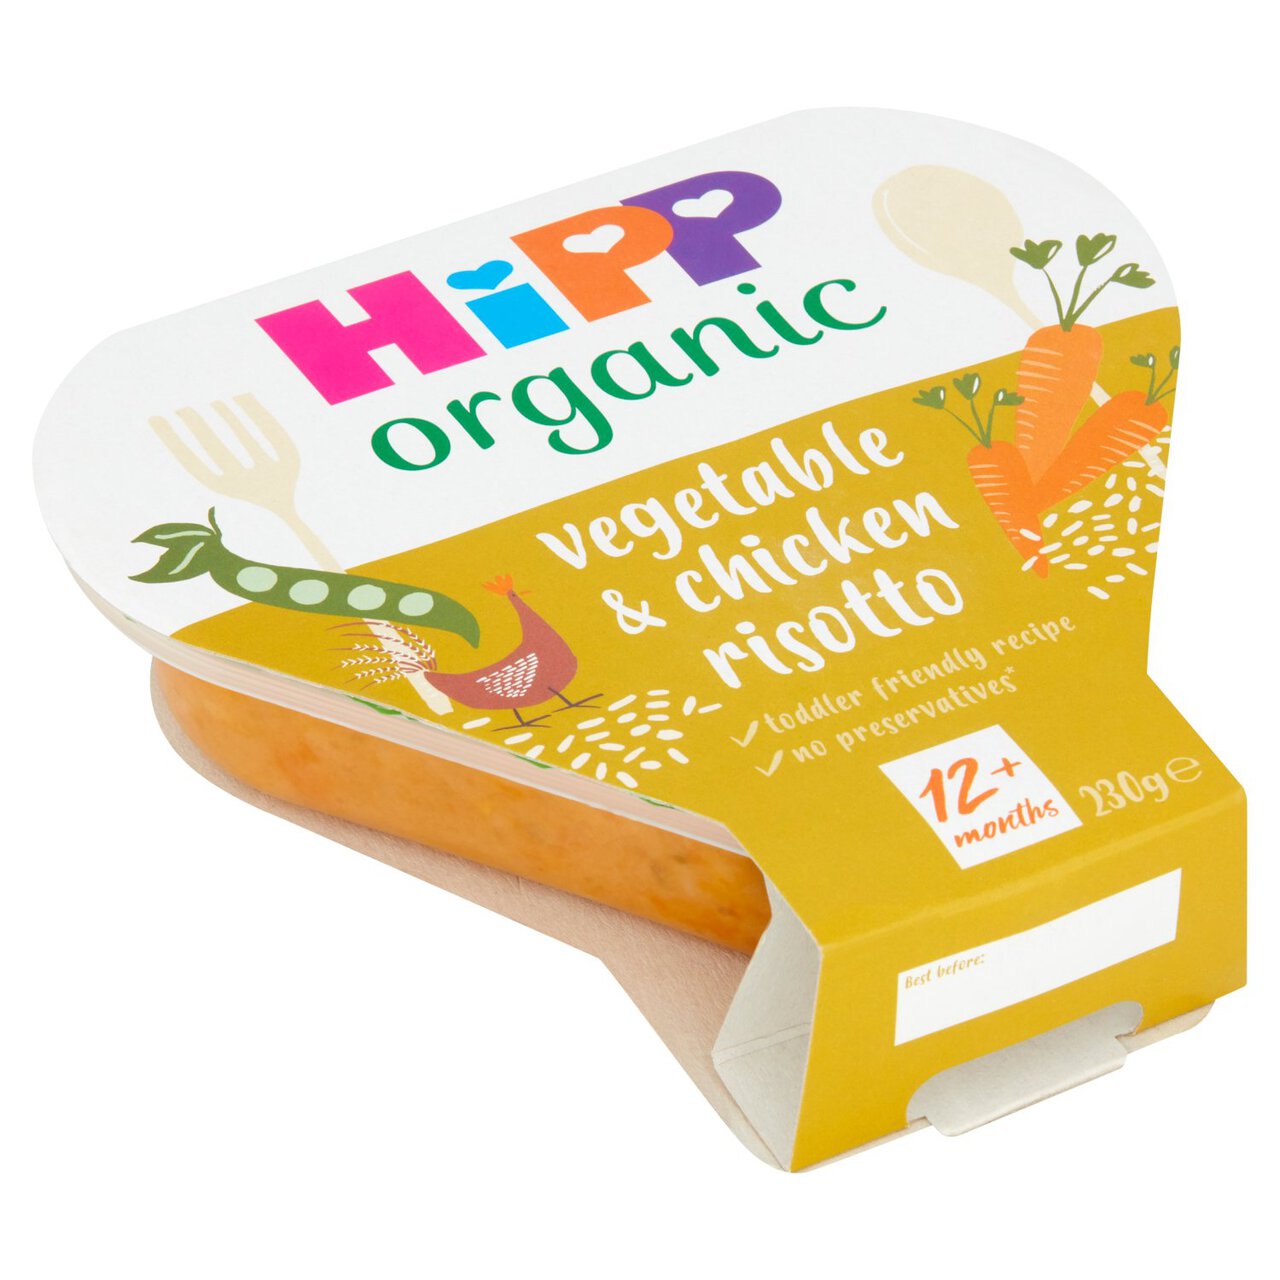 HiPP Organic Vegetable & Chicken Risotto Toddler Tray Meal 1-3 Years 230g